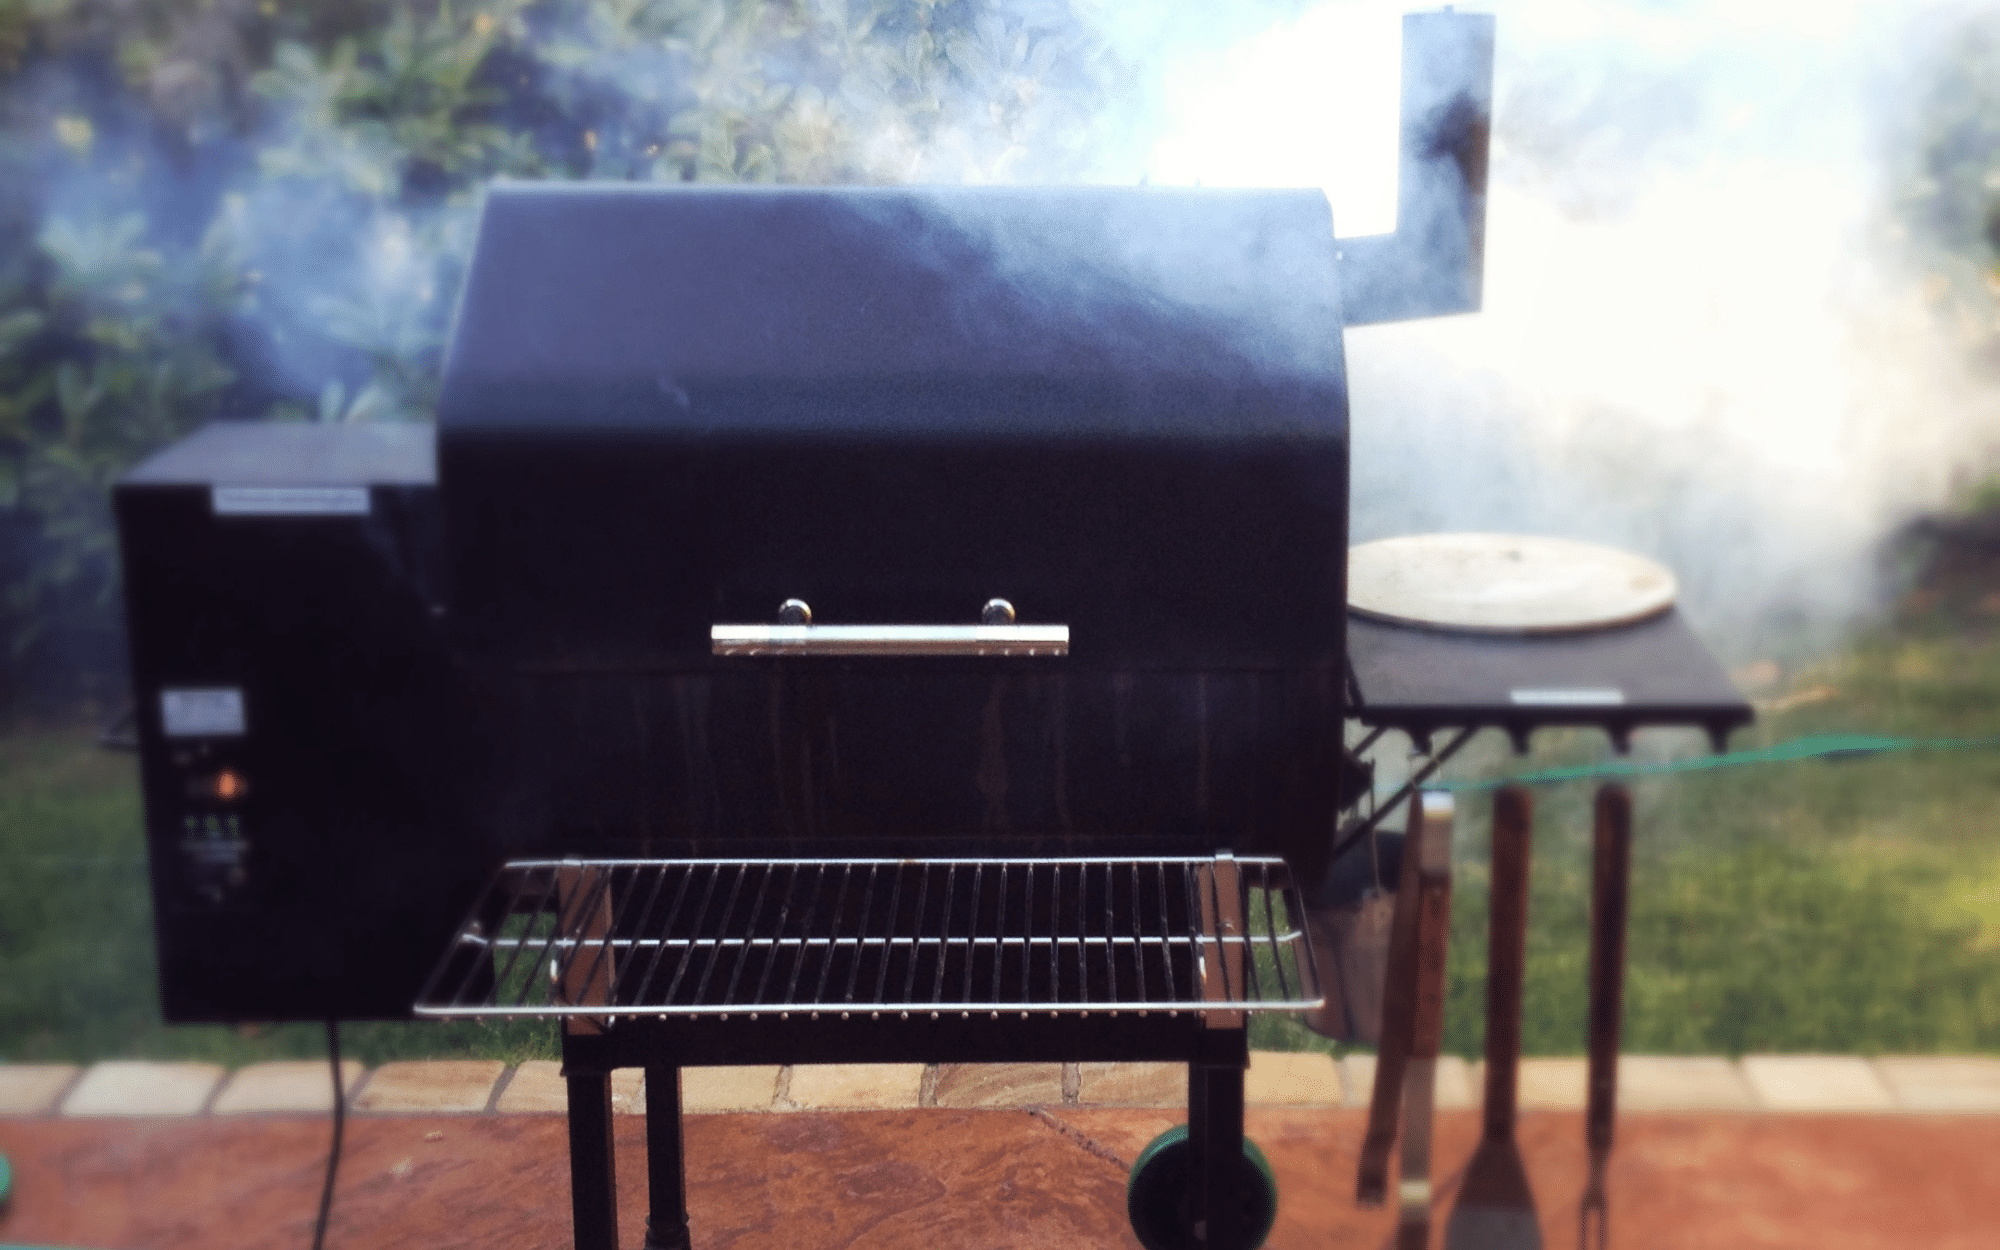 Why buy a pellet grill